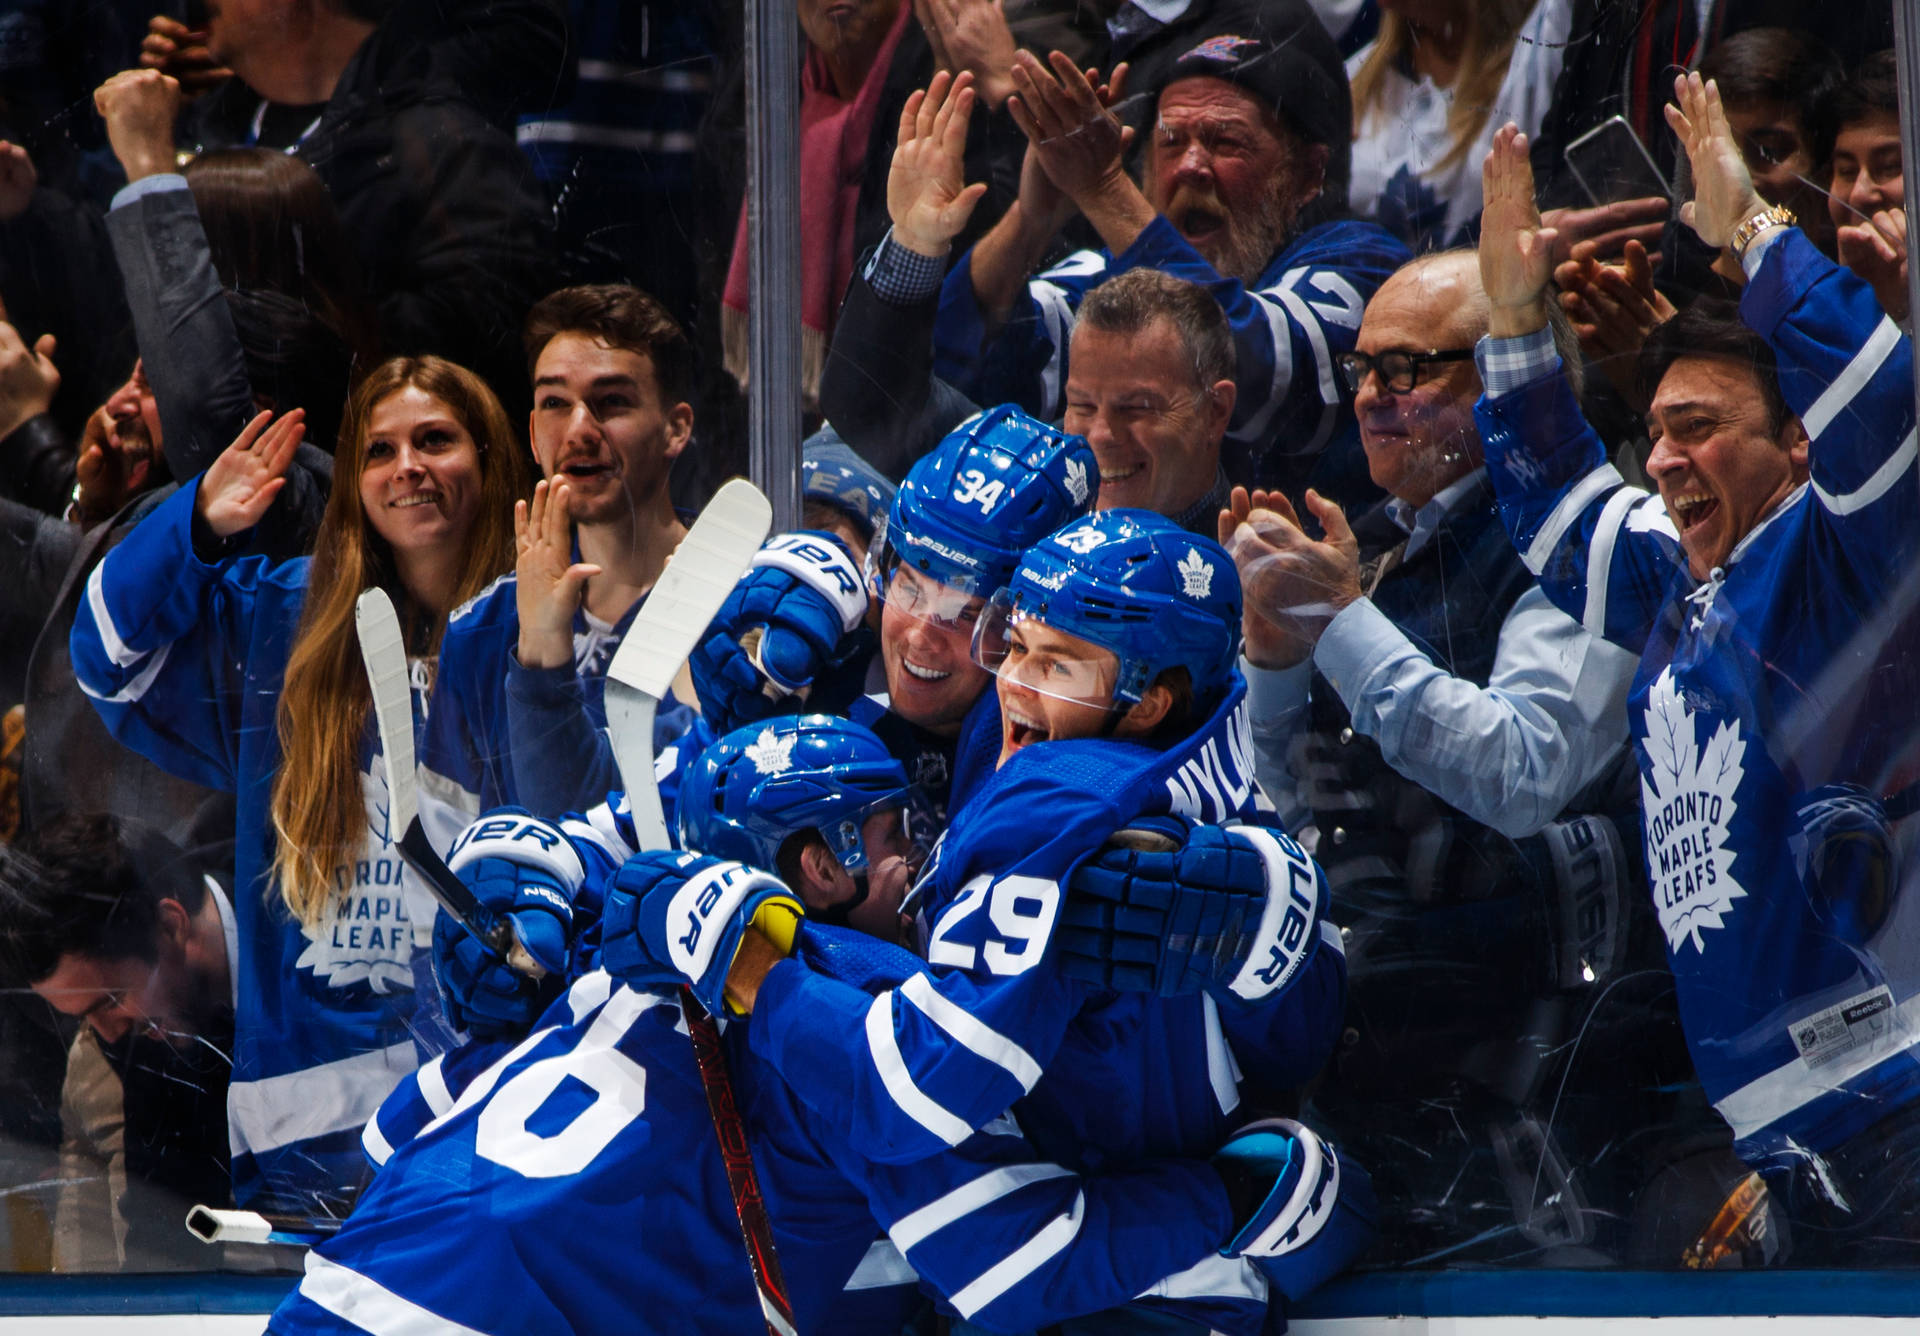 Williamnylander Februari 2019 Seger. (this Can Be Used As A Caption For A Computer Or Mobile Wallpaper Featuring William Nylander And Celebrating His Victory In February 2019.) Wallpaper